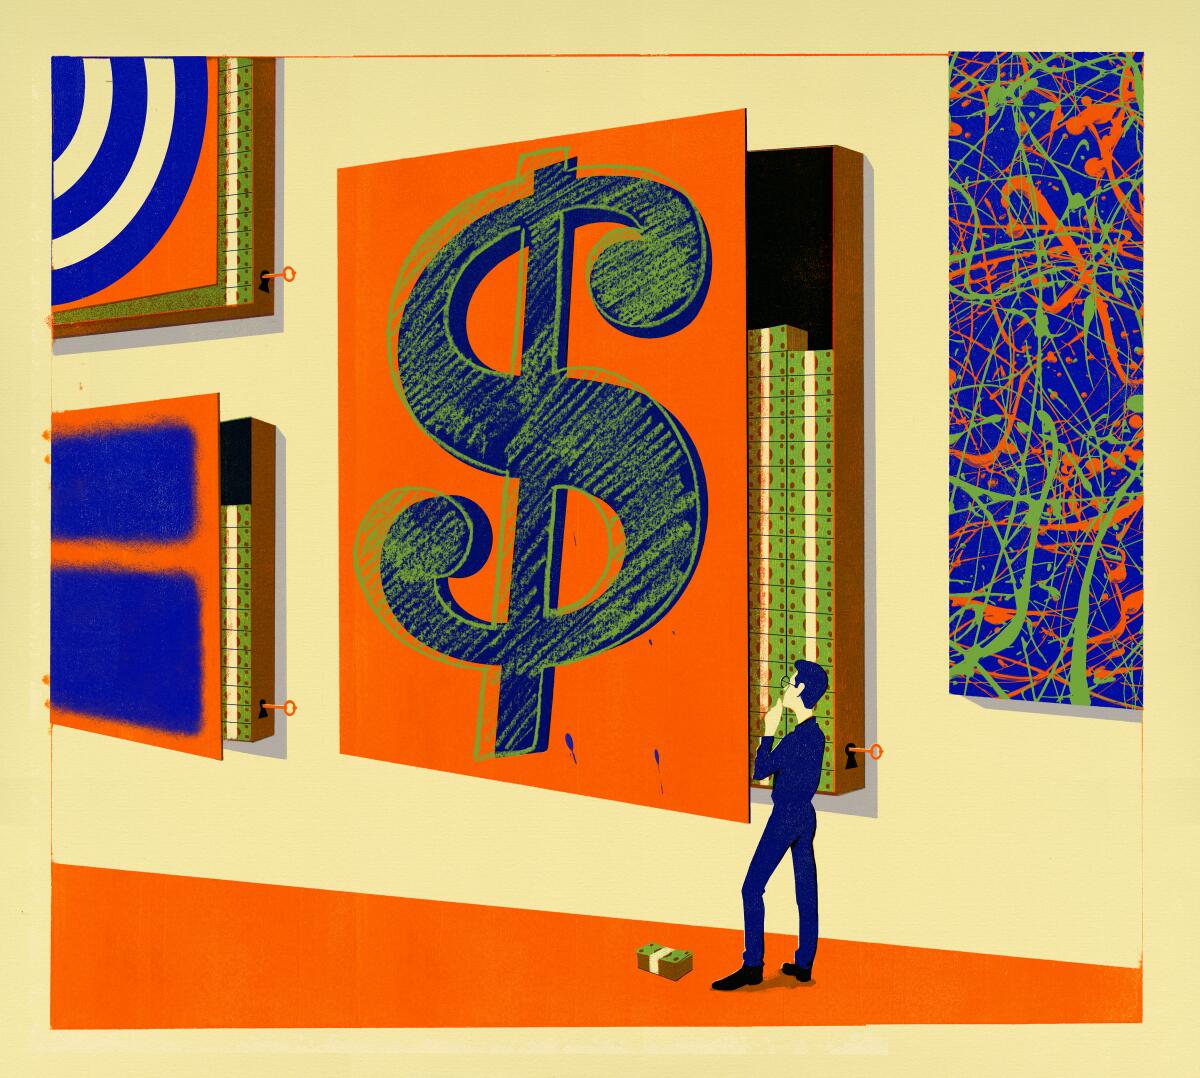 Art-secured lending has been around for years but has matured since the financial crisis.